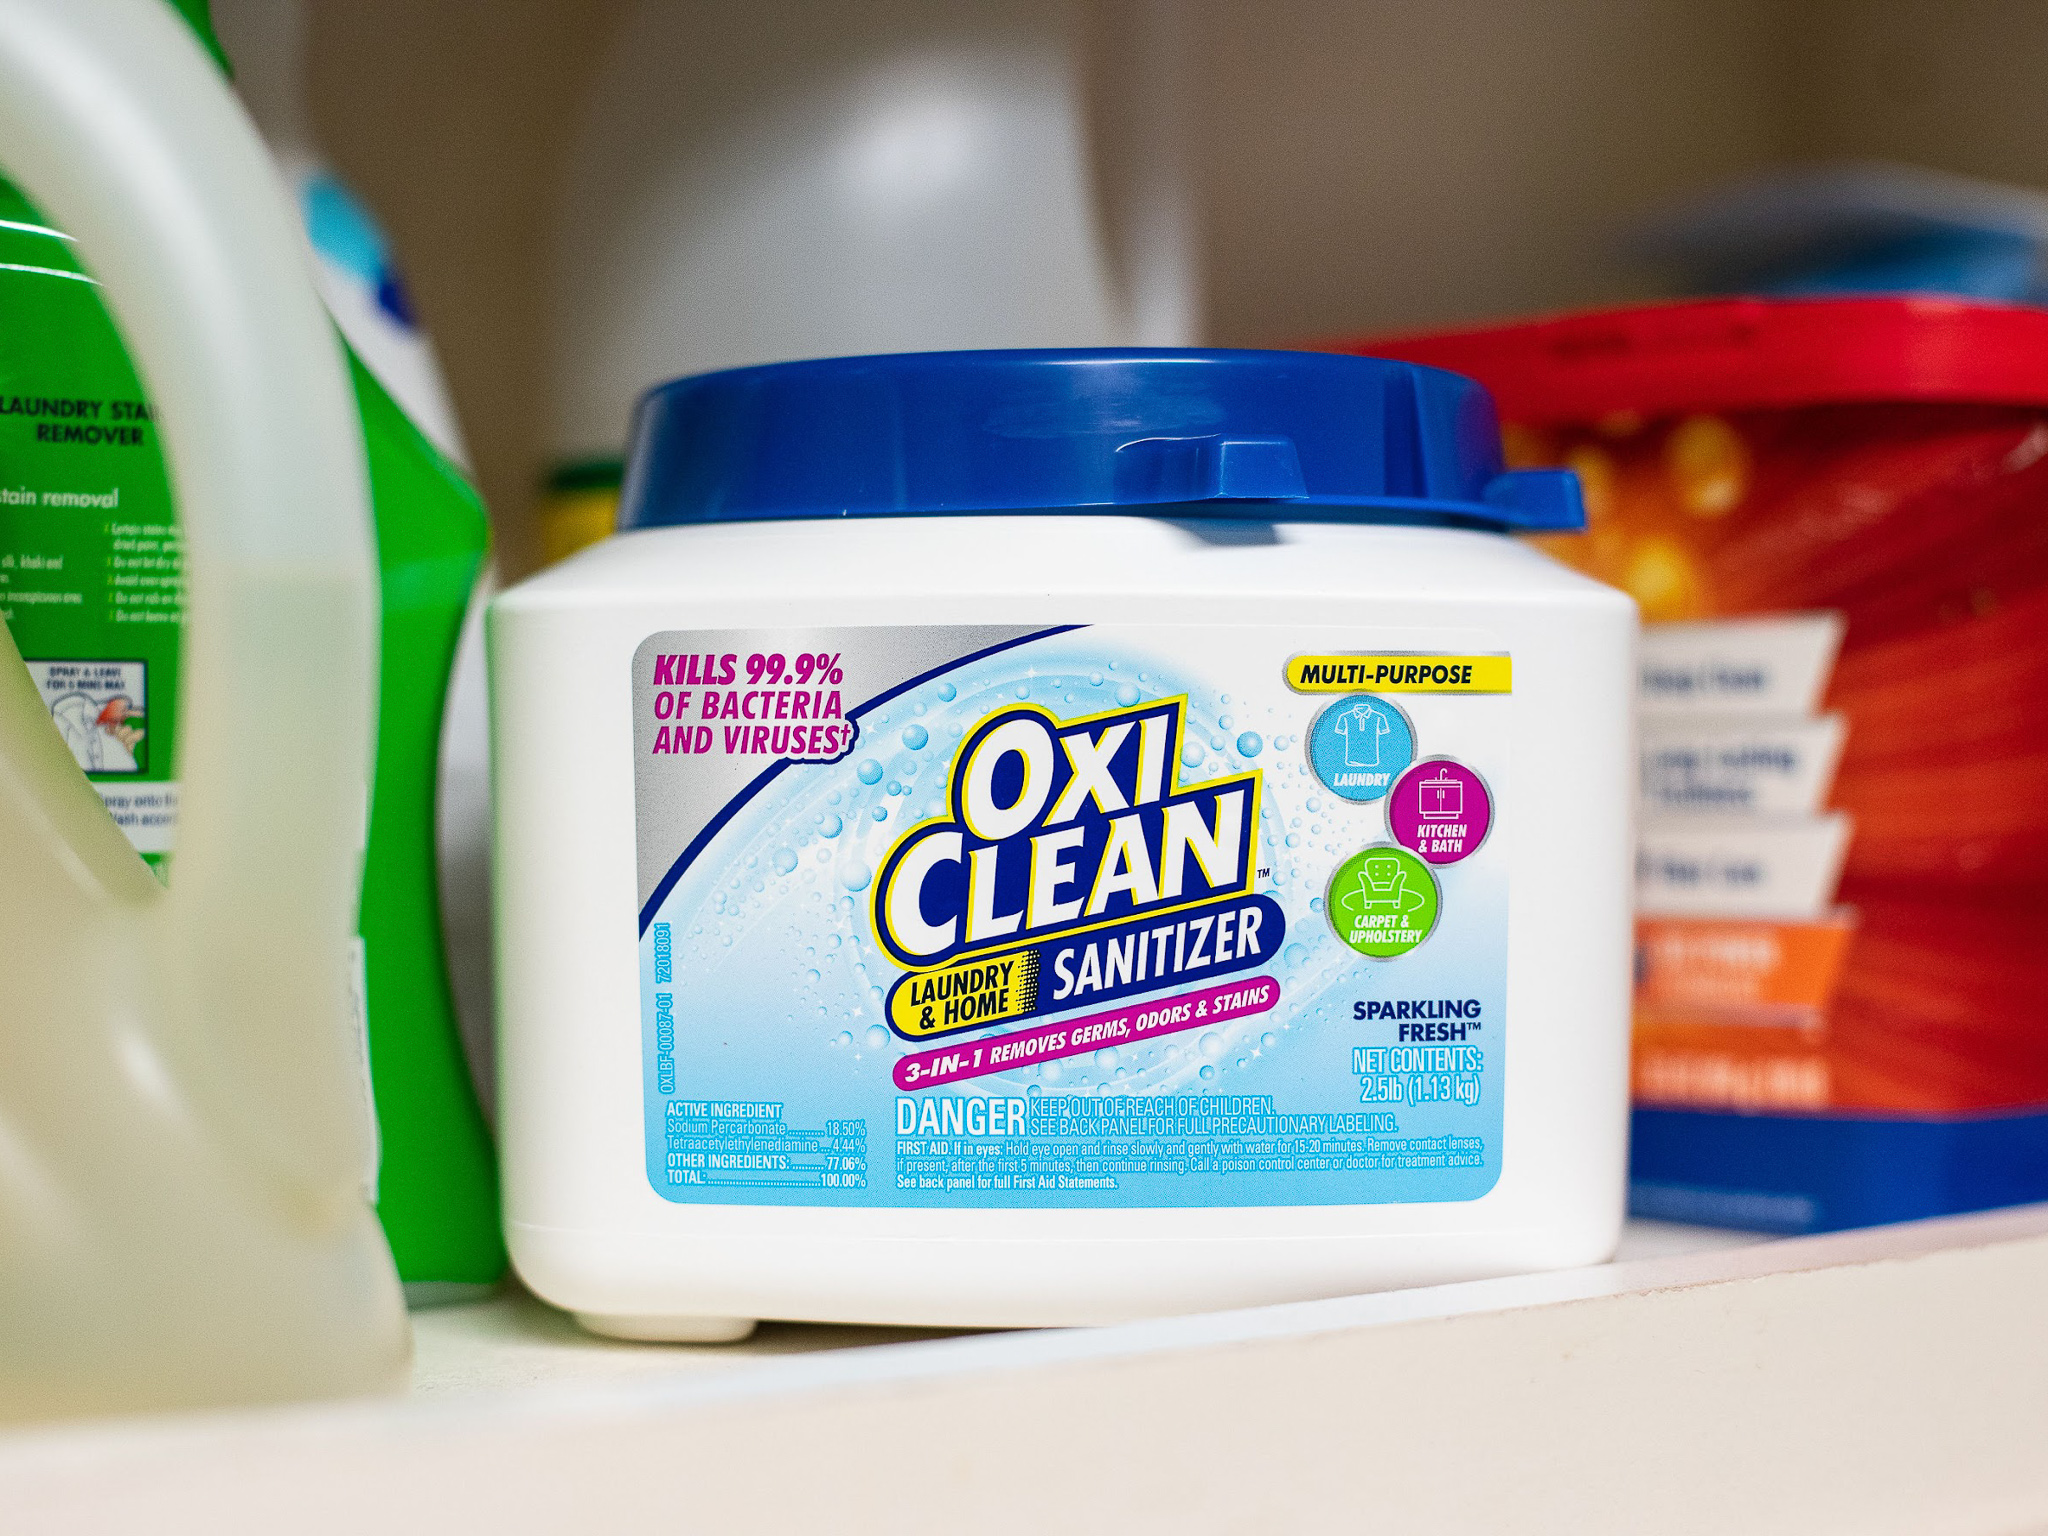 When Life Gets Messy, Clean It Up With New OxiClean™ Laundry & Home Sanitizer on I Heart Publix 1